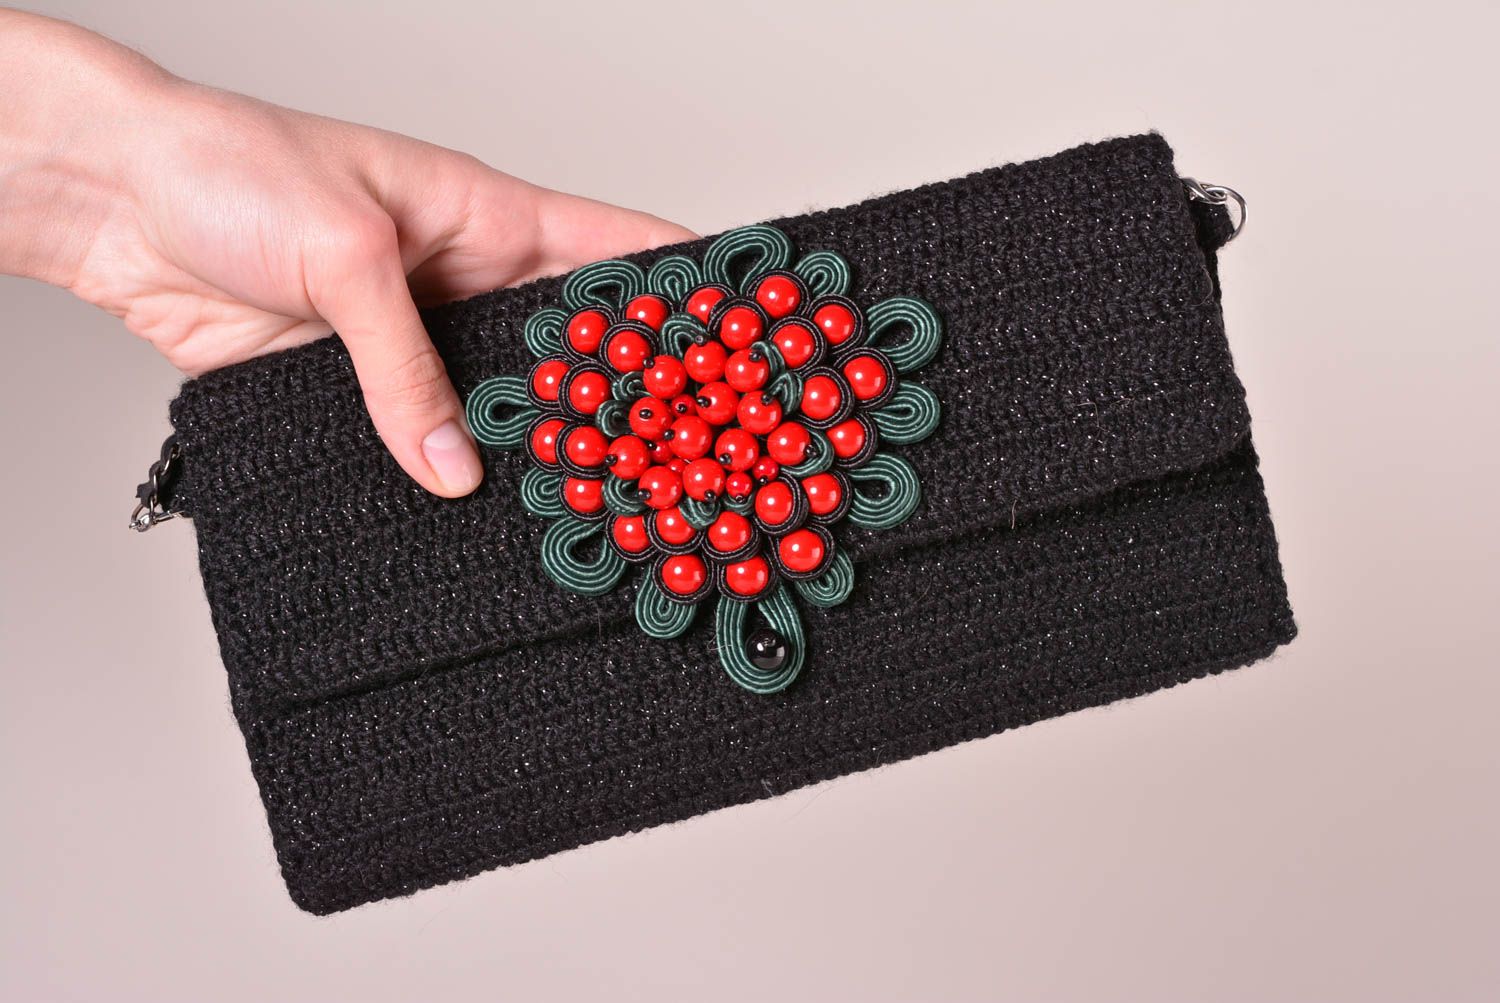 Handmade clutch bag soutache purse for women designer accessories gifts for her photo 2